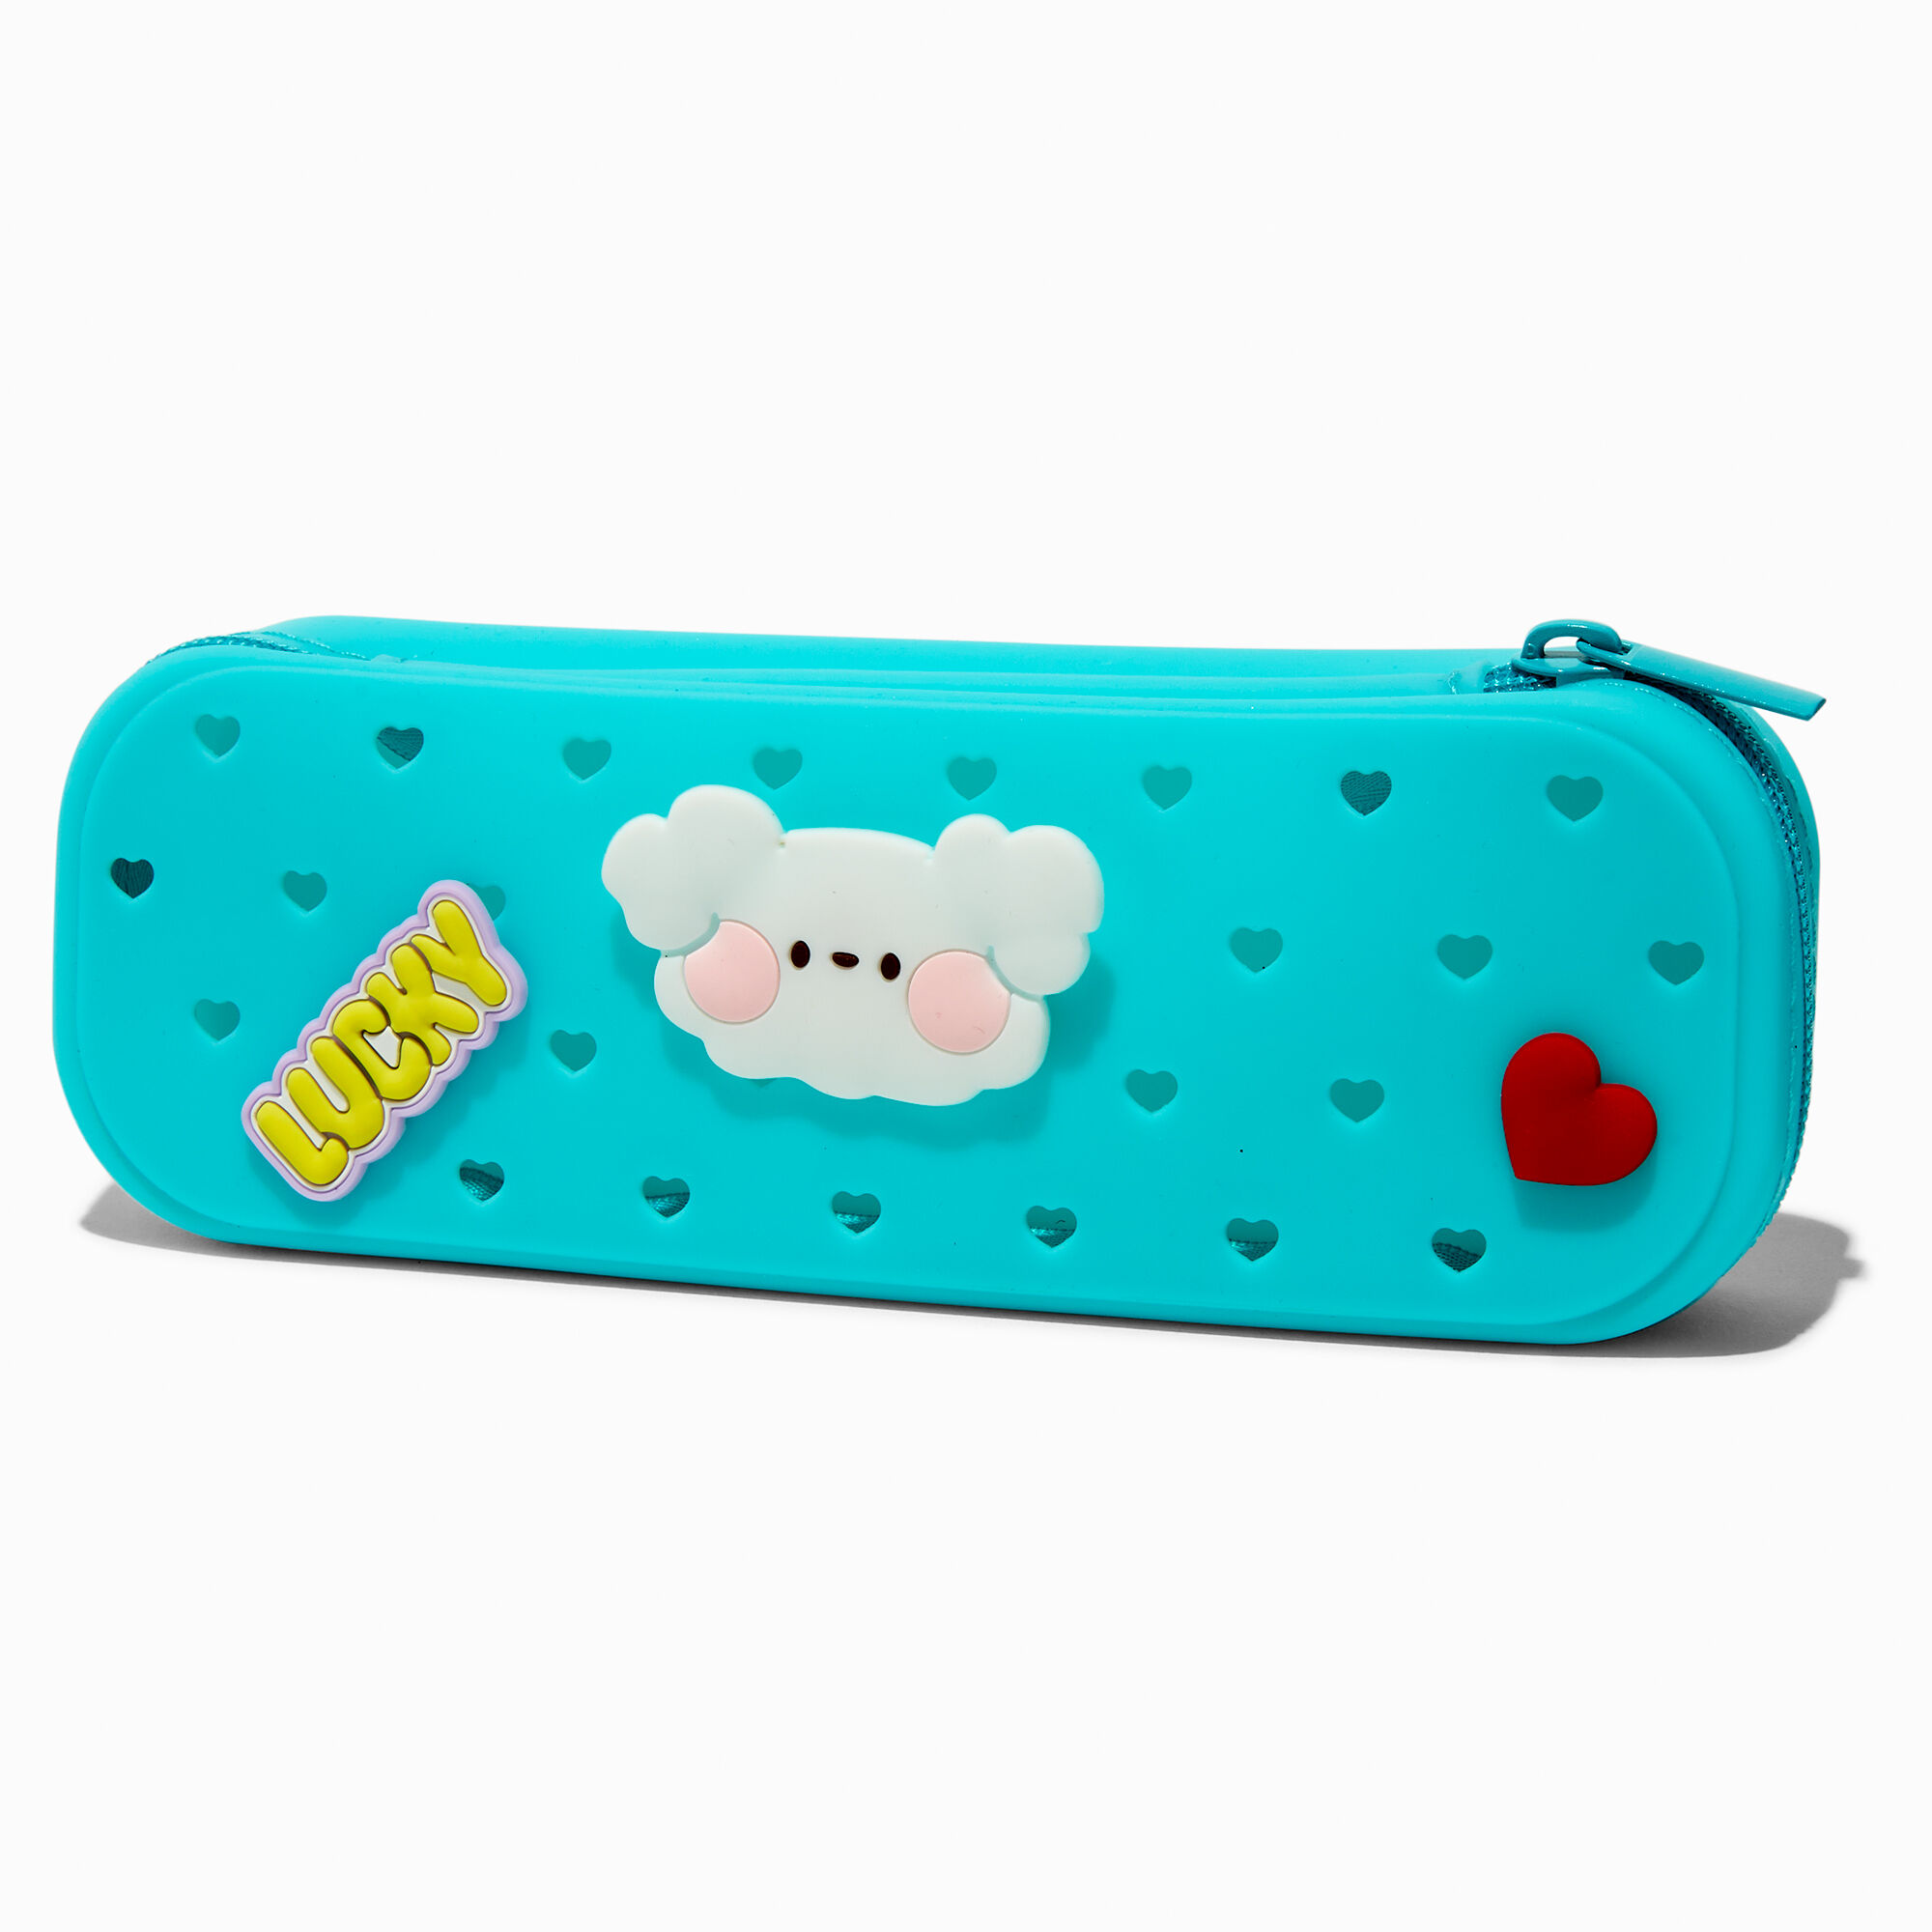 View Claires Silicone Charm Pencil Case Blue information